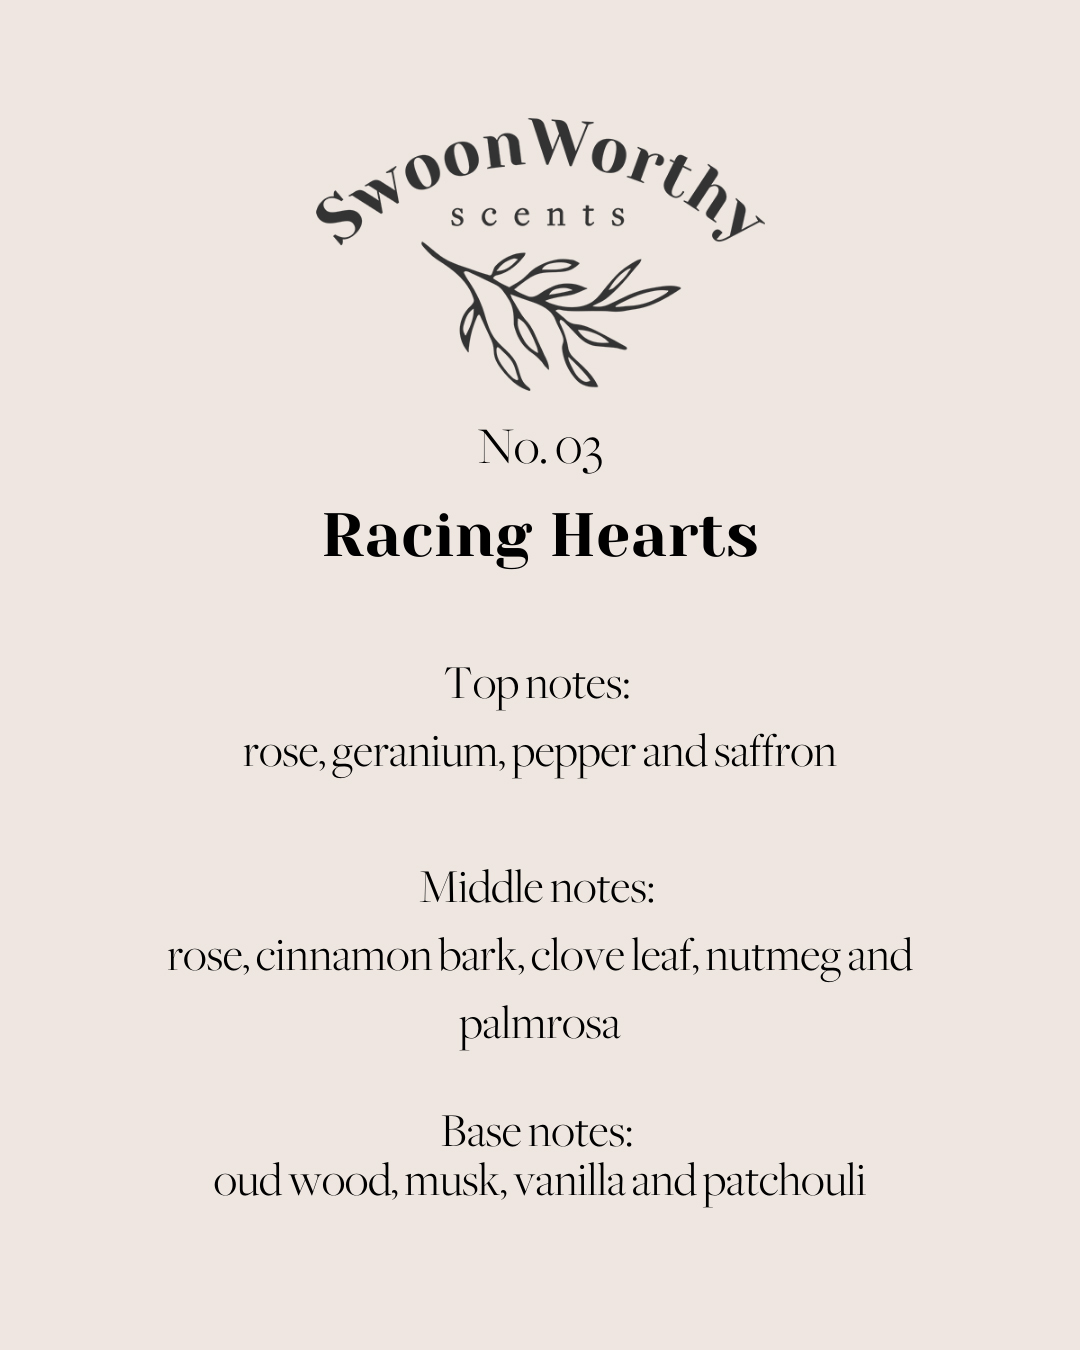 No 03 Racing Hearts candle plain background 35GBP